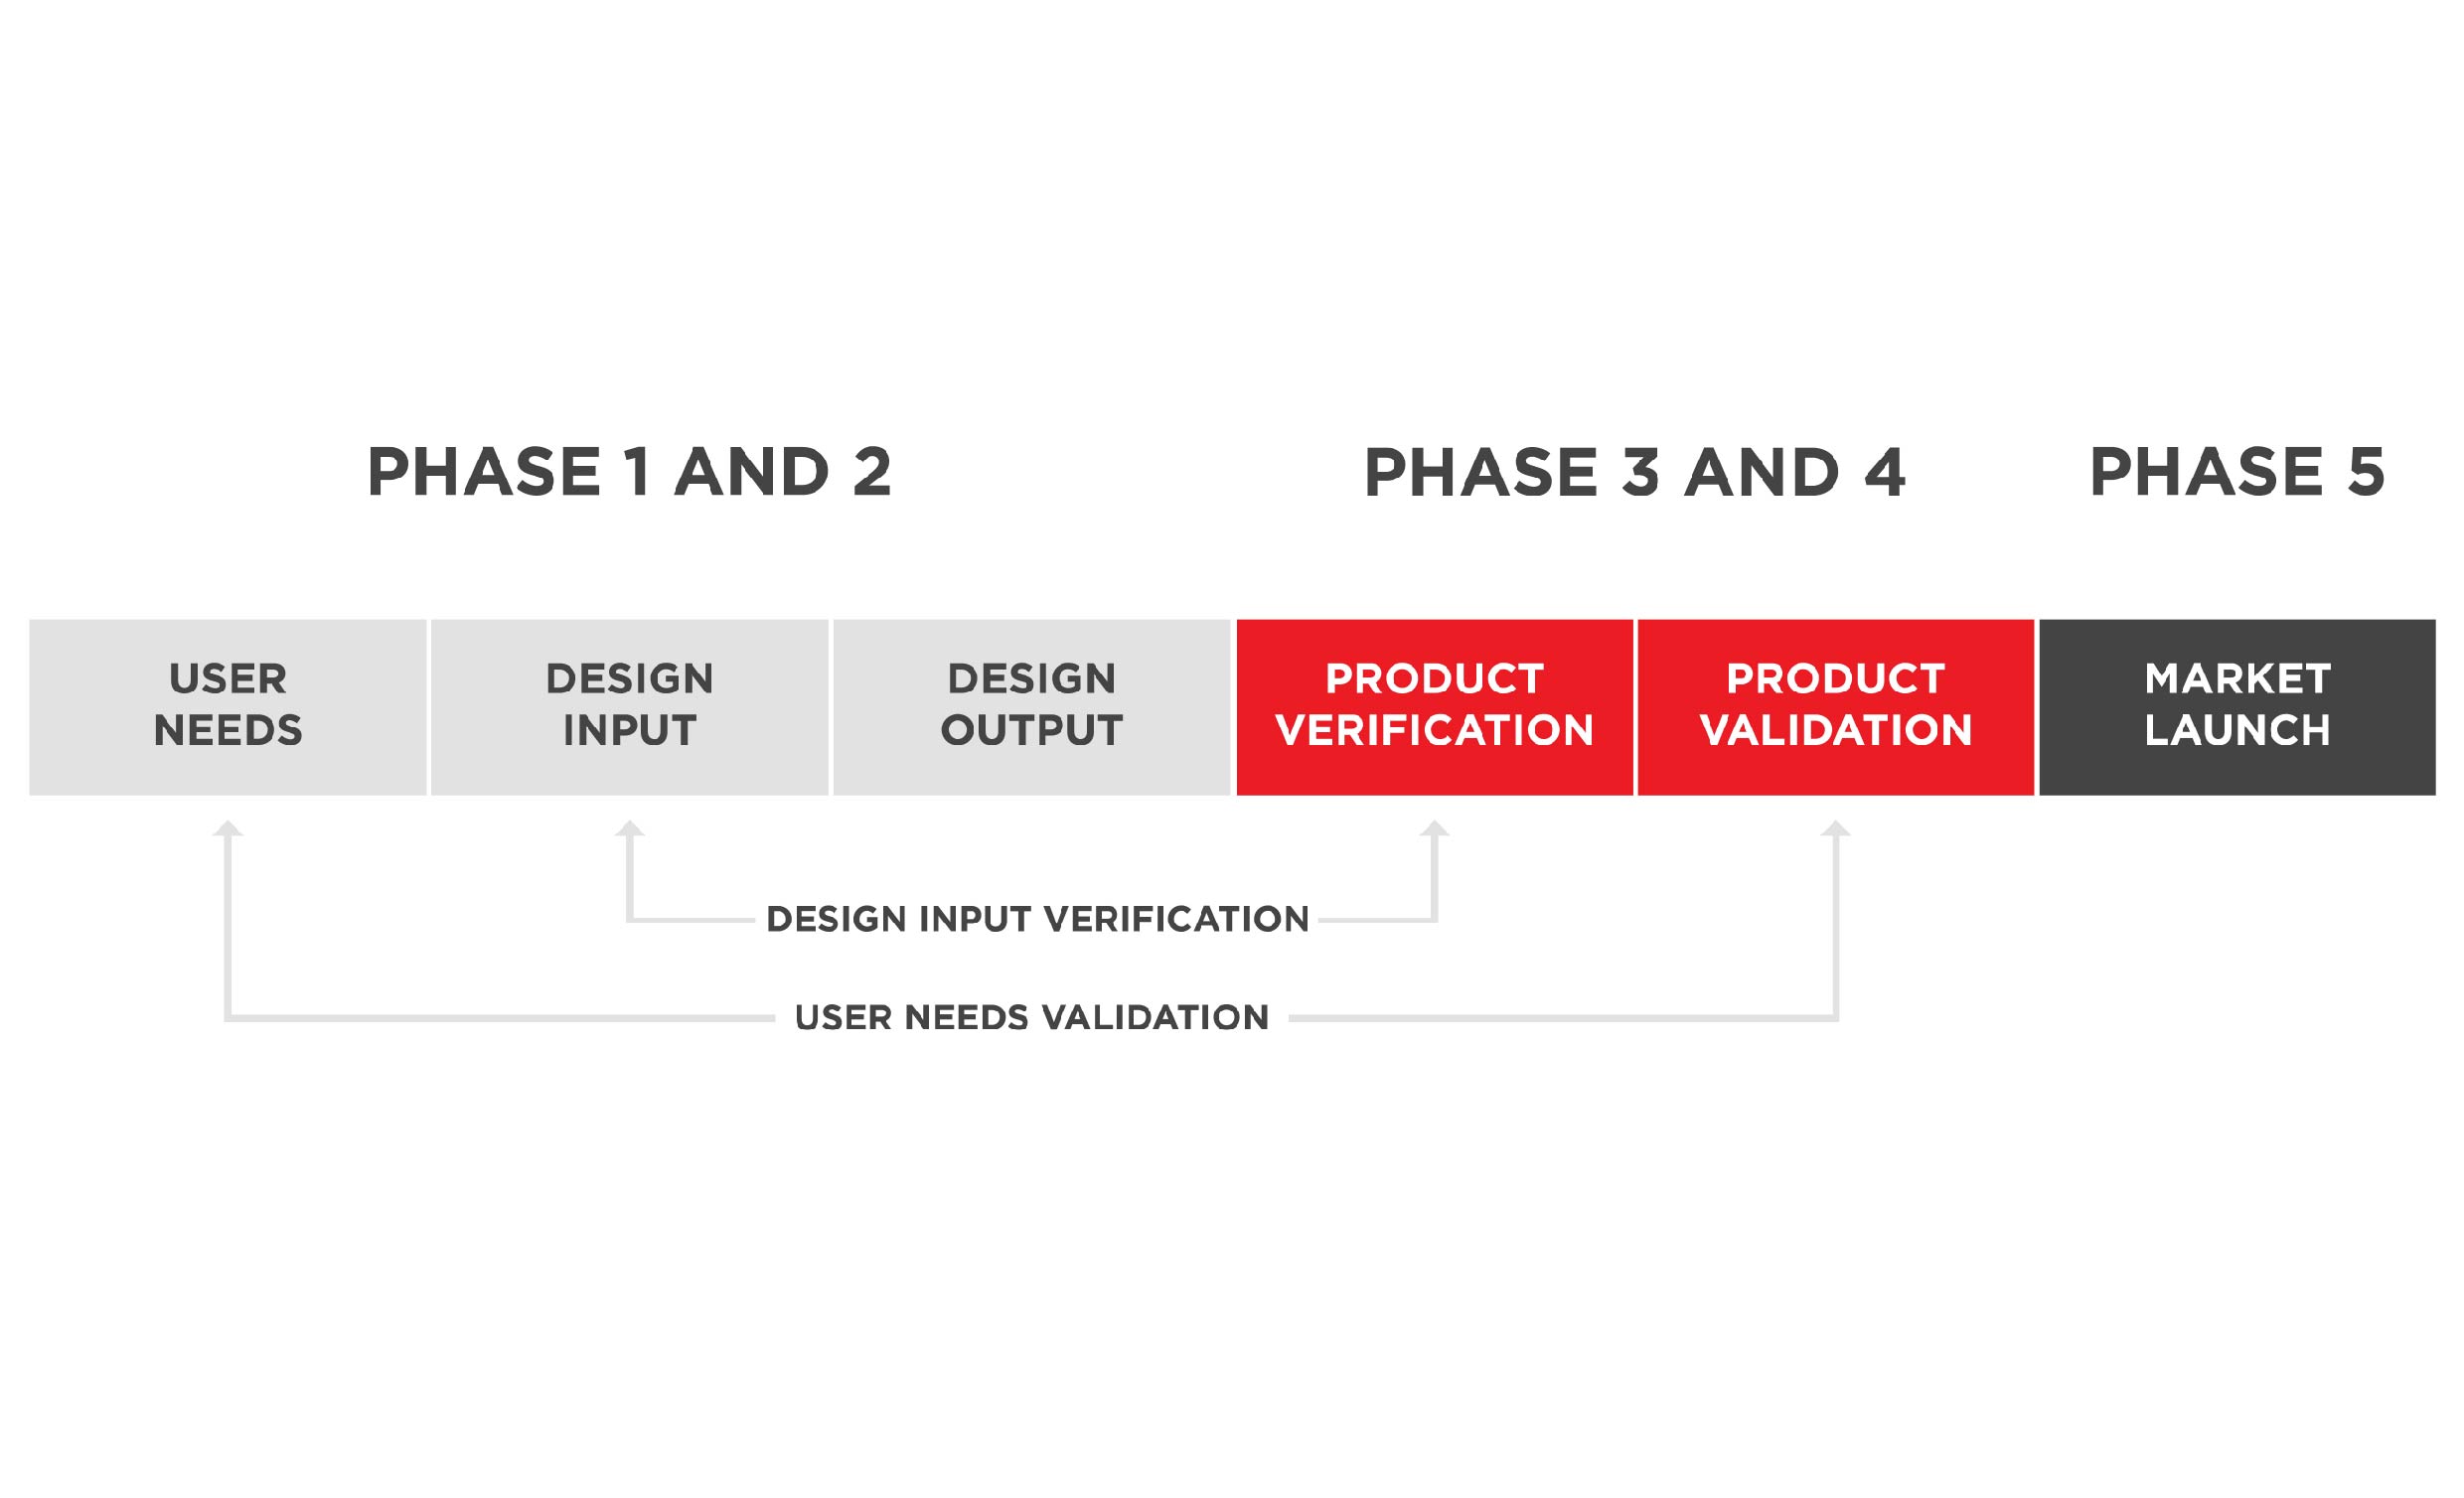 A visual representation of the phases of product development, including ideation, design, testing, and launch.